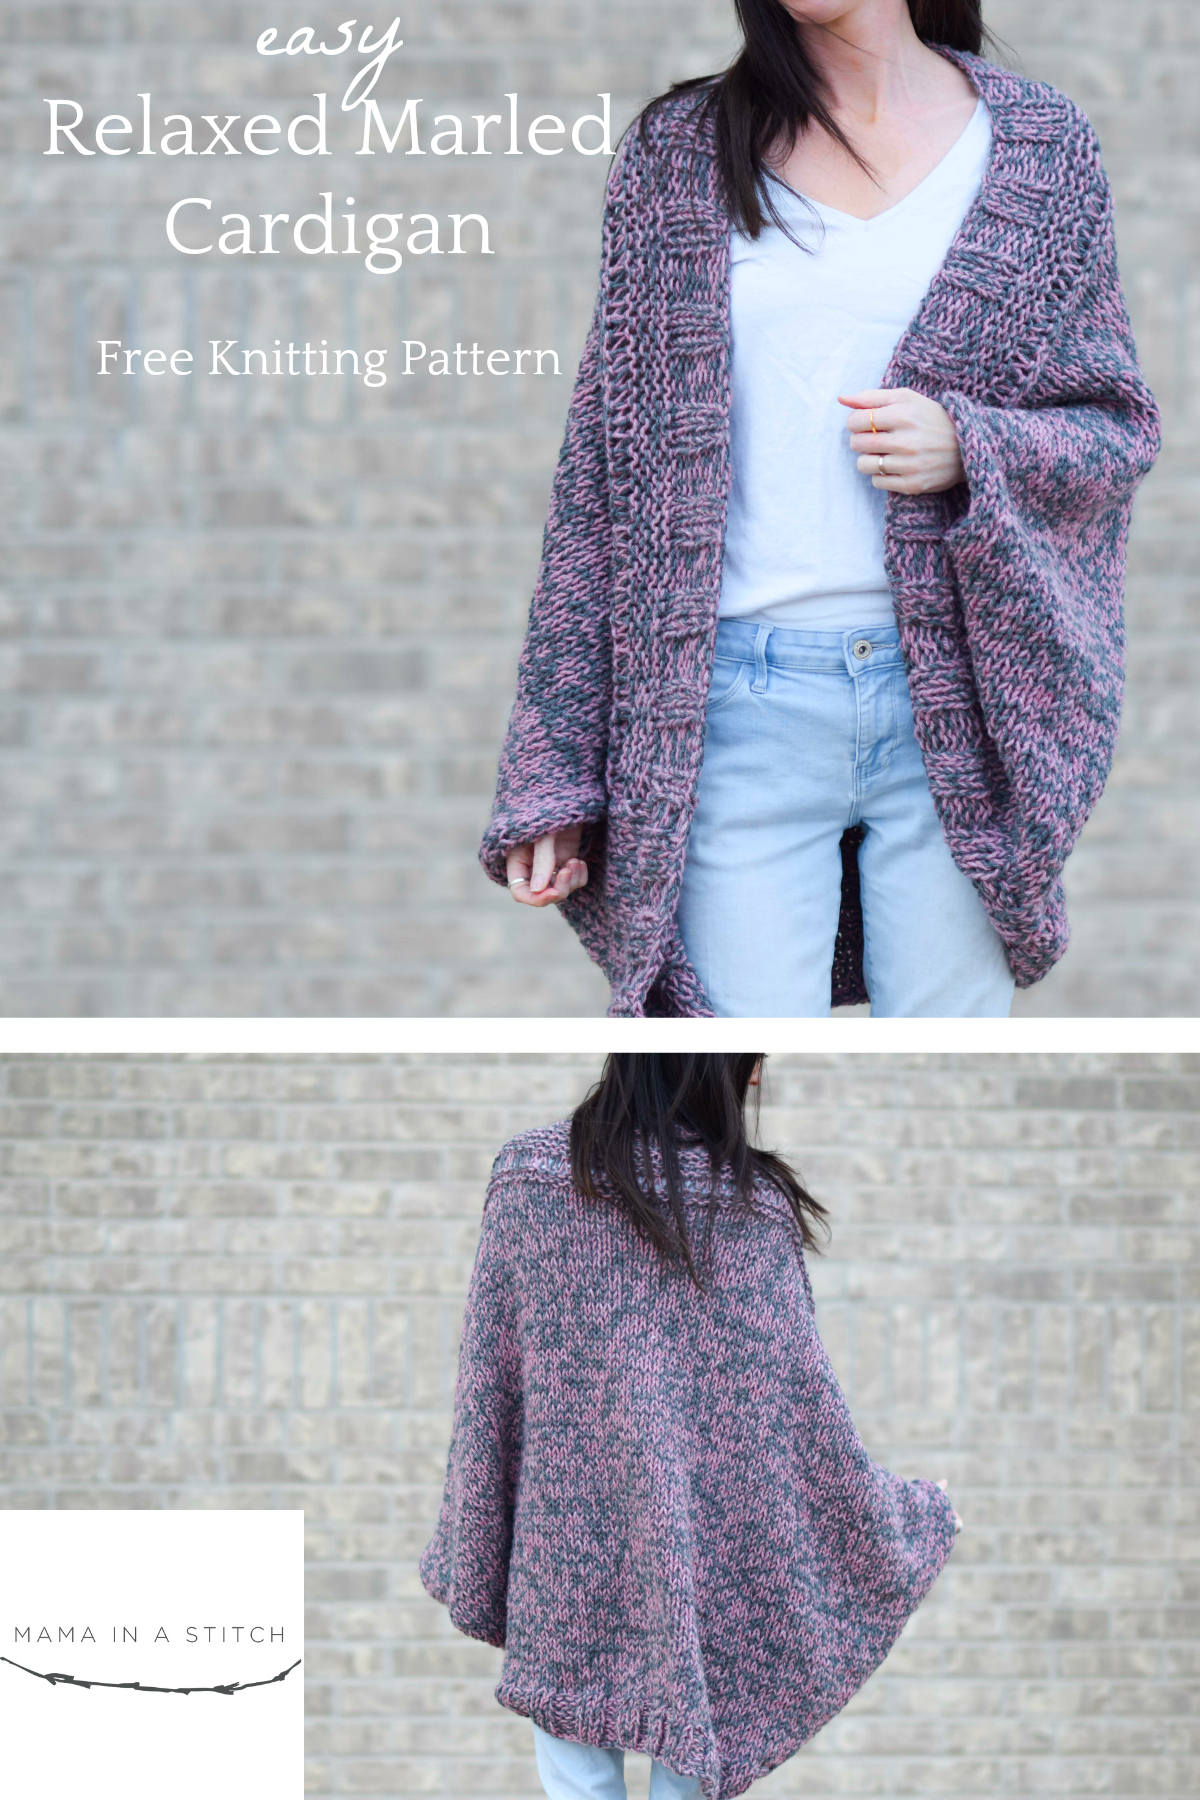 Free Cardigan Knitting Patterns For Beginners Easy Relaxed Marled Cardigan Knitting Pattern Mama In A Stitch